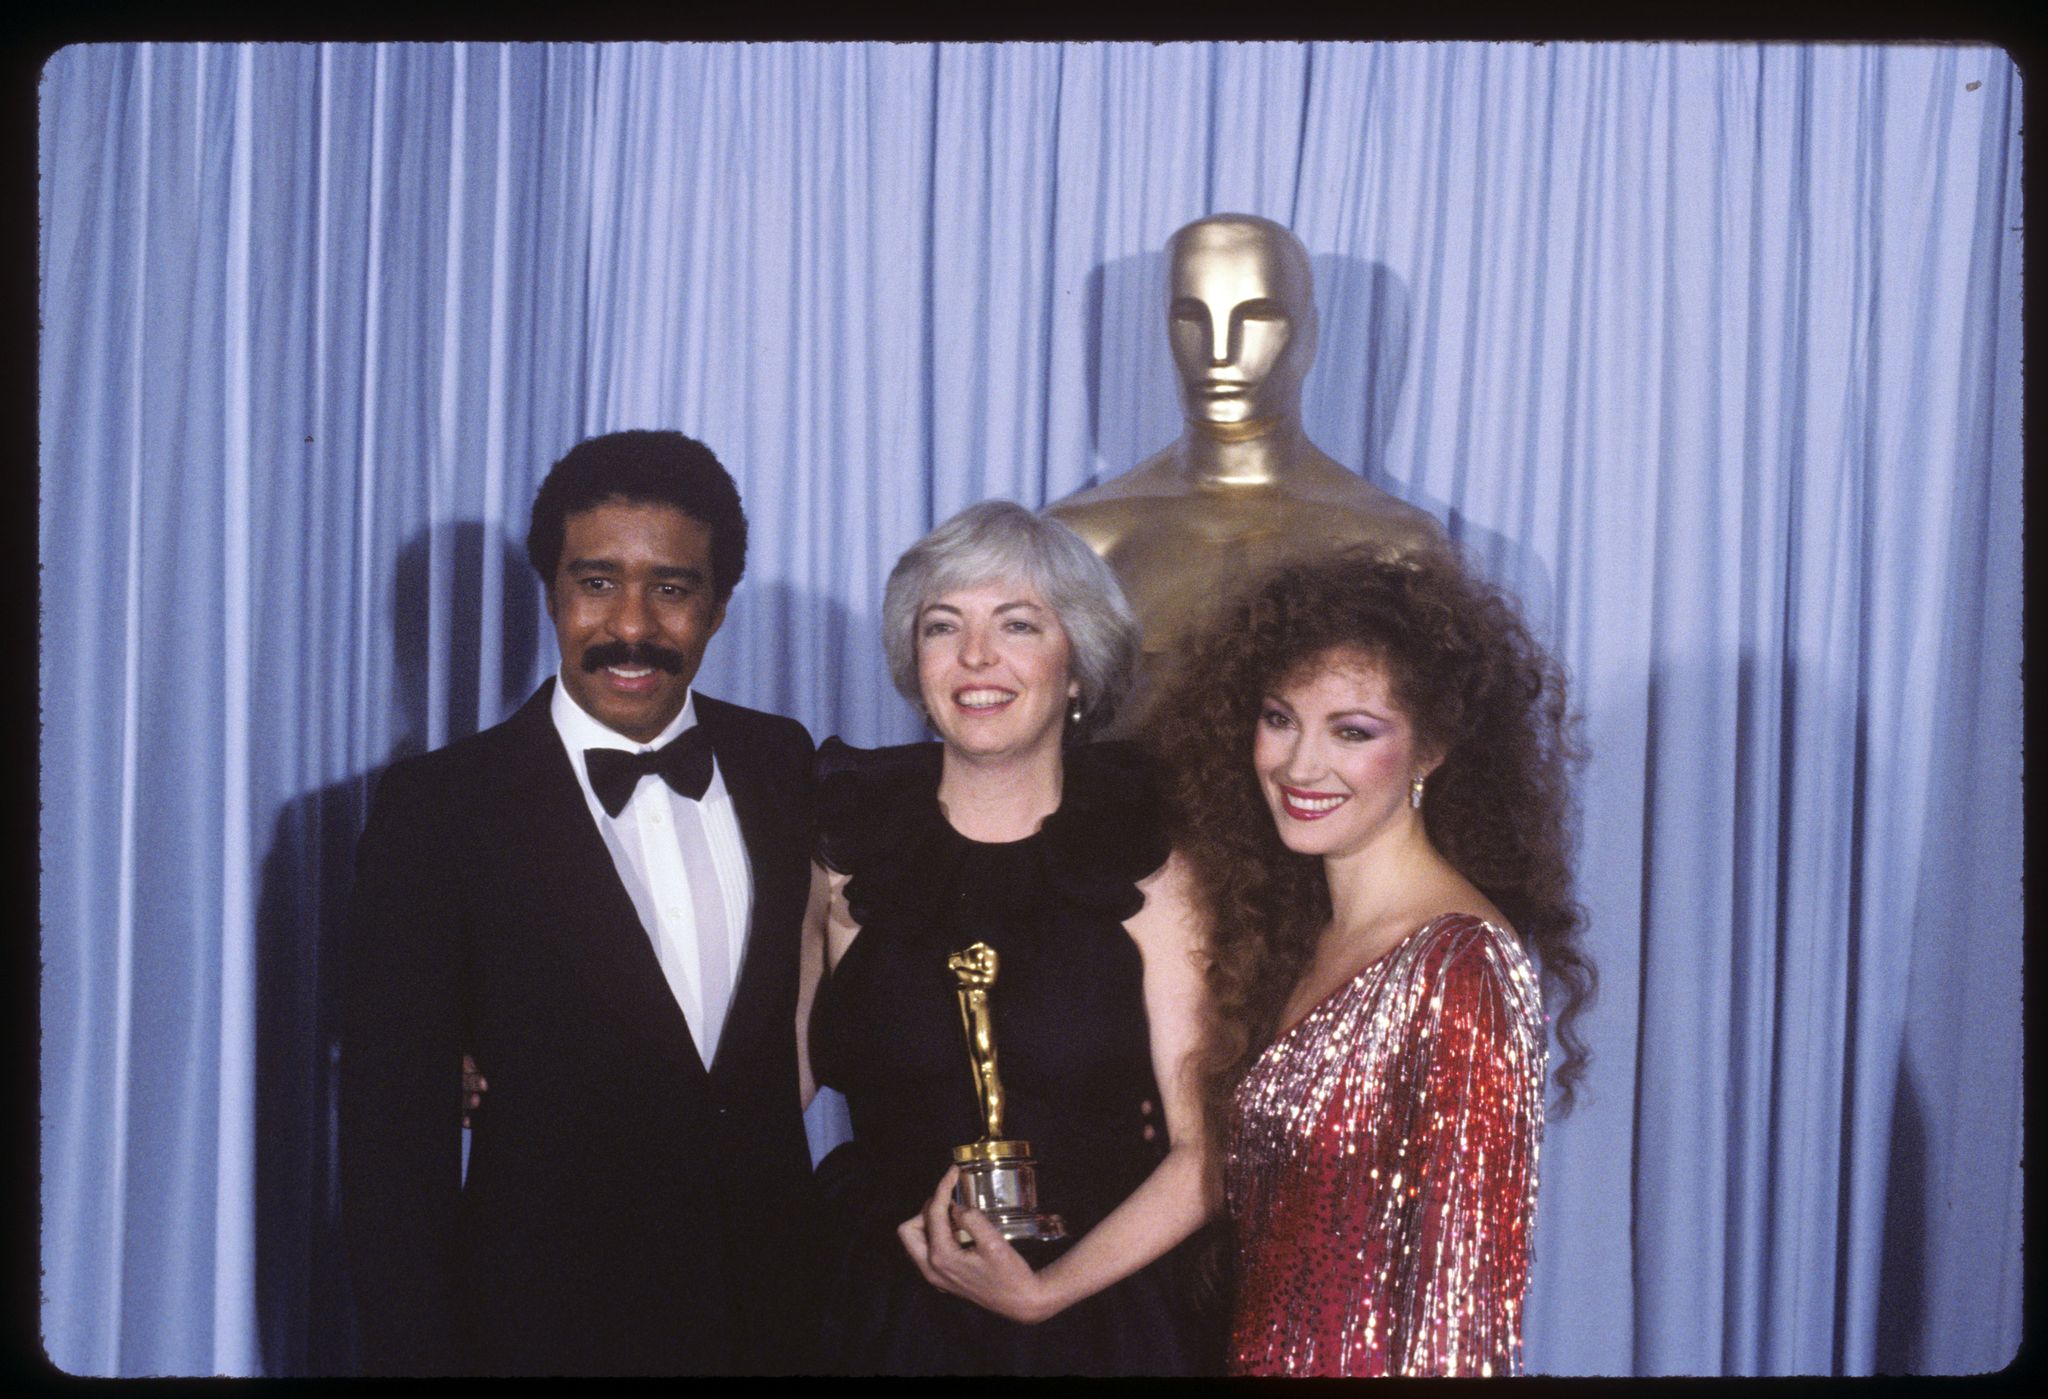 the 53rd annual academy awards backstage coverage airdate march 31, 1981 photo by abc photo archivesdisney general entertainment content via getty images thelma schoonmaker c, best film editing winner for raging bull with presenters richard pryor and jane seymour